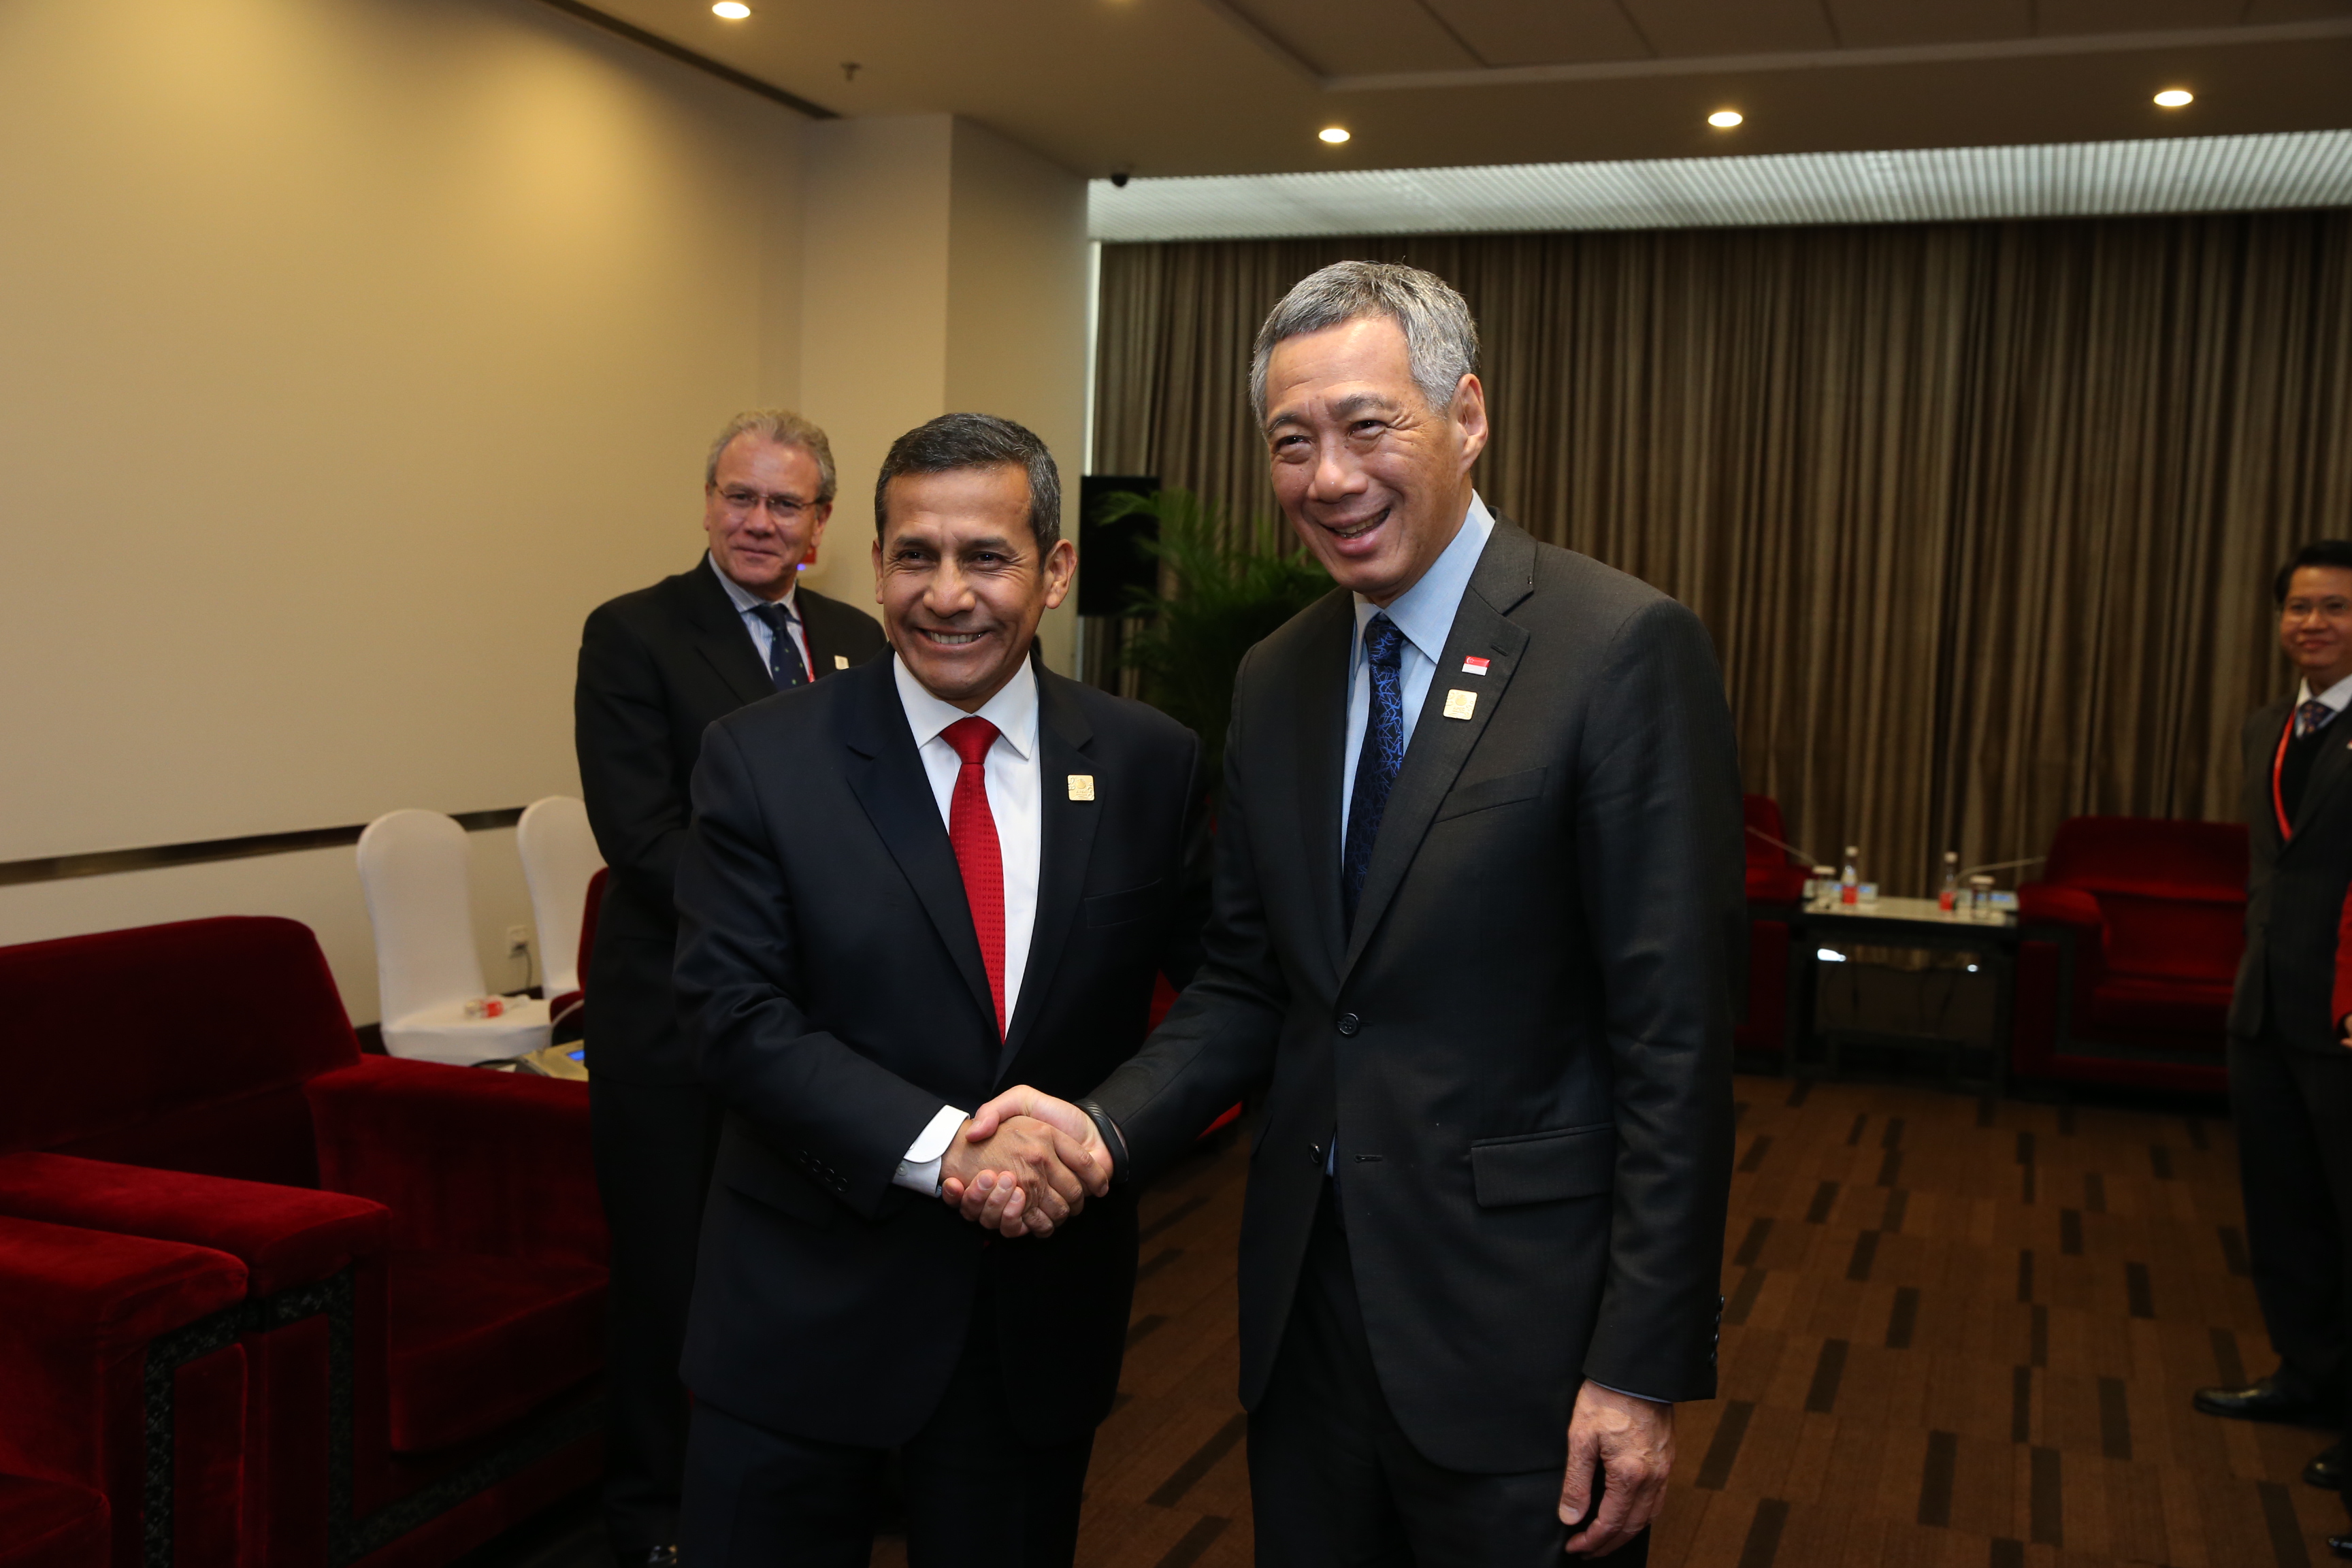 Prime Minister Lee Hsien Loong meeting Peruvian President Ollanta Humala at the 22nd Asia-Pacific Economic Cooperation (APEC) Economic Leaders’ Meeting from 10 to 11 Nov 2014 in Beijing, China (MCI Photo by LH Goh) 